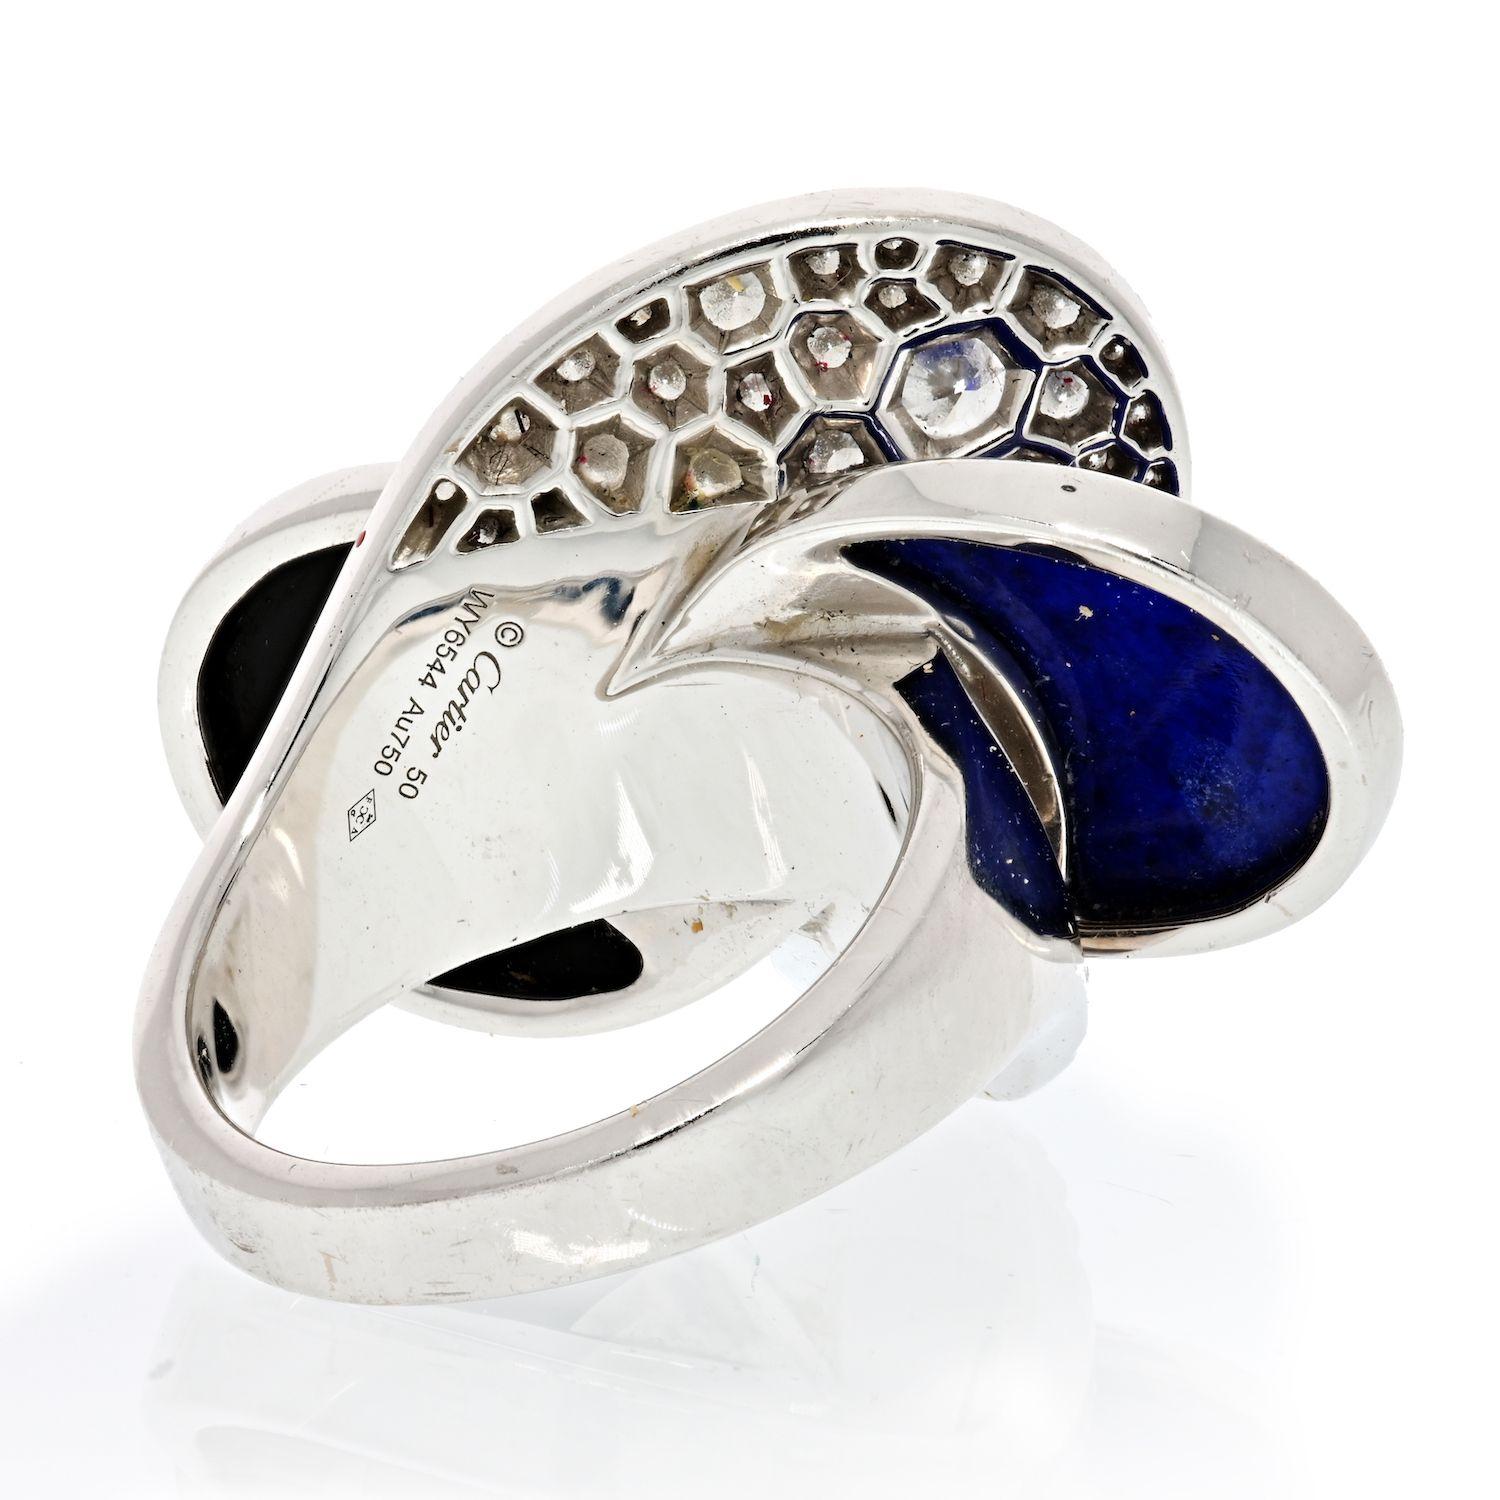 Cartier 18K White Gold Lapis Lazuli, Onyx and Diamond Ring In Excellent Condition For Sale In New York, NY